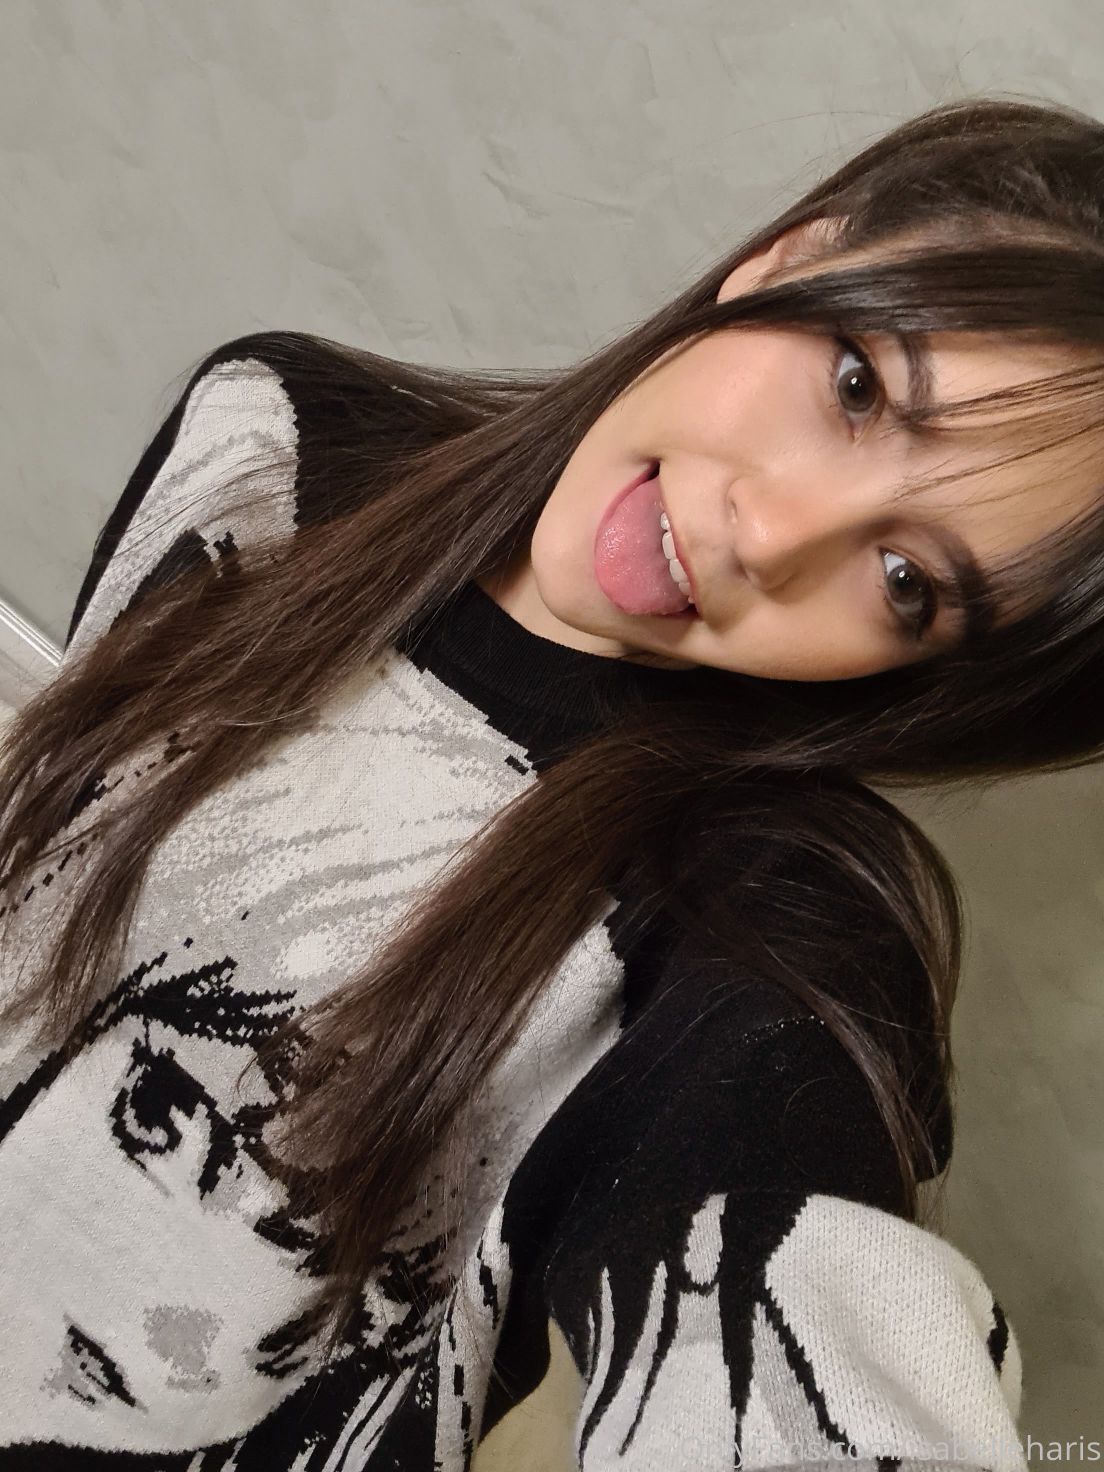 AsianOnlyfans 331 232 20211024